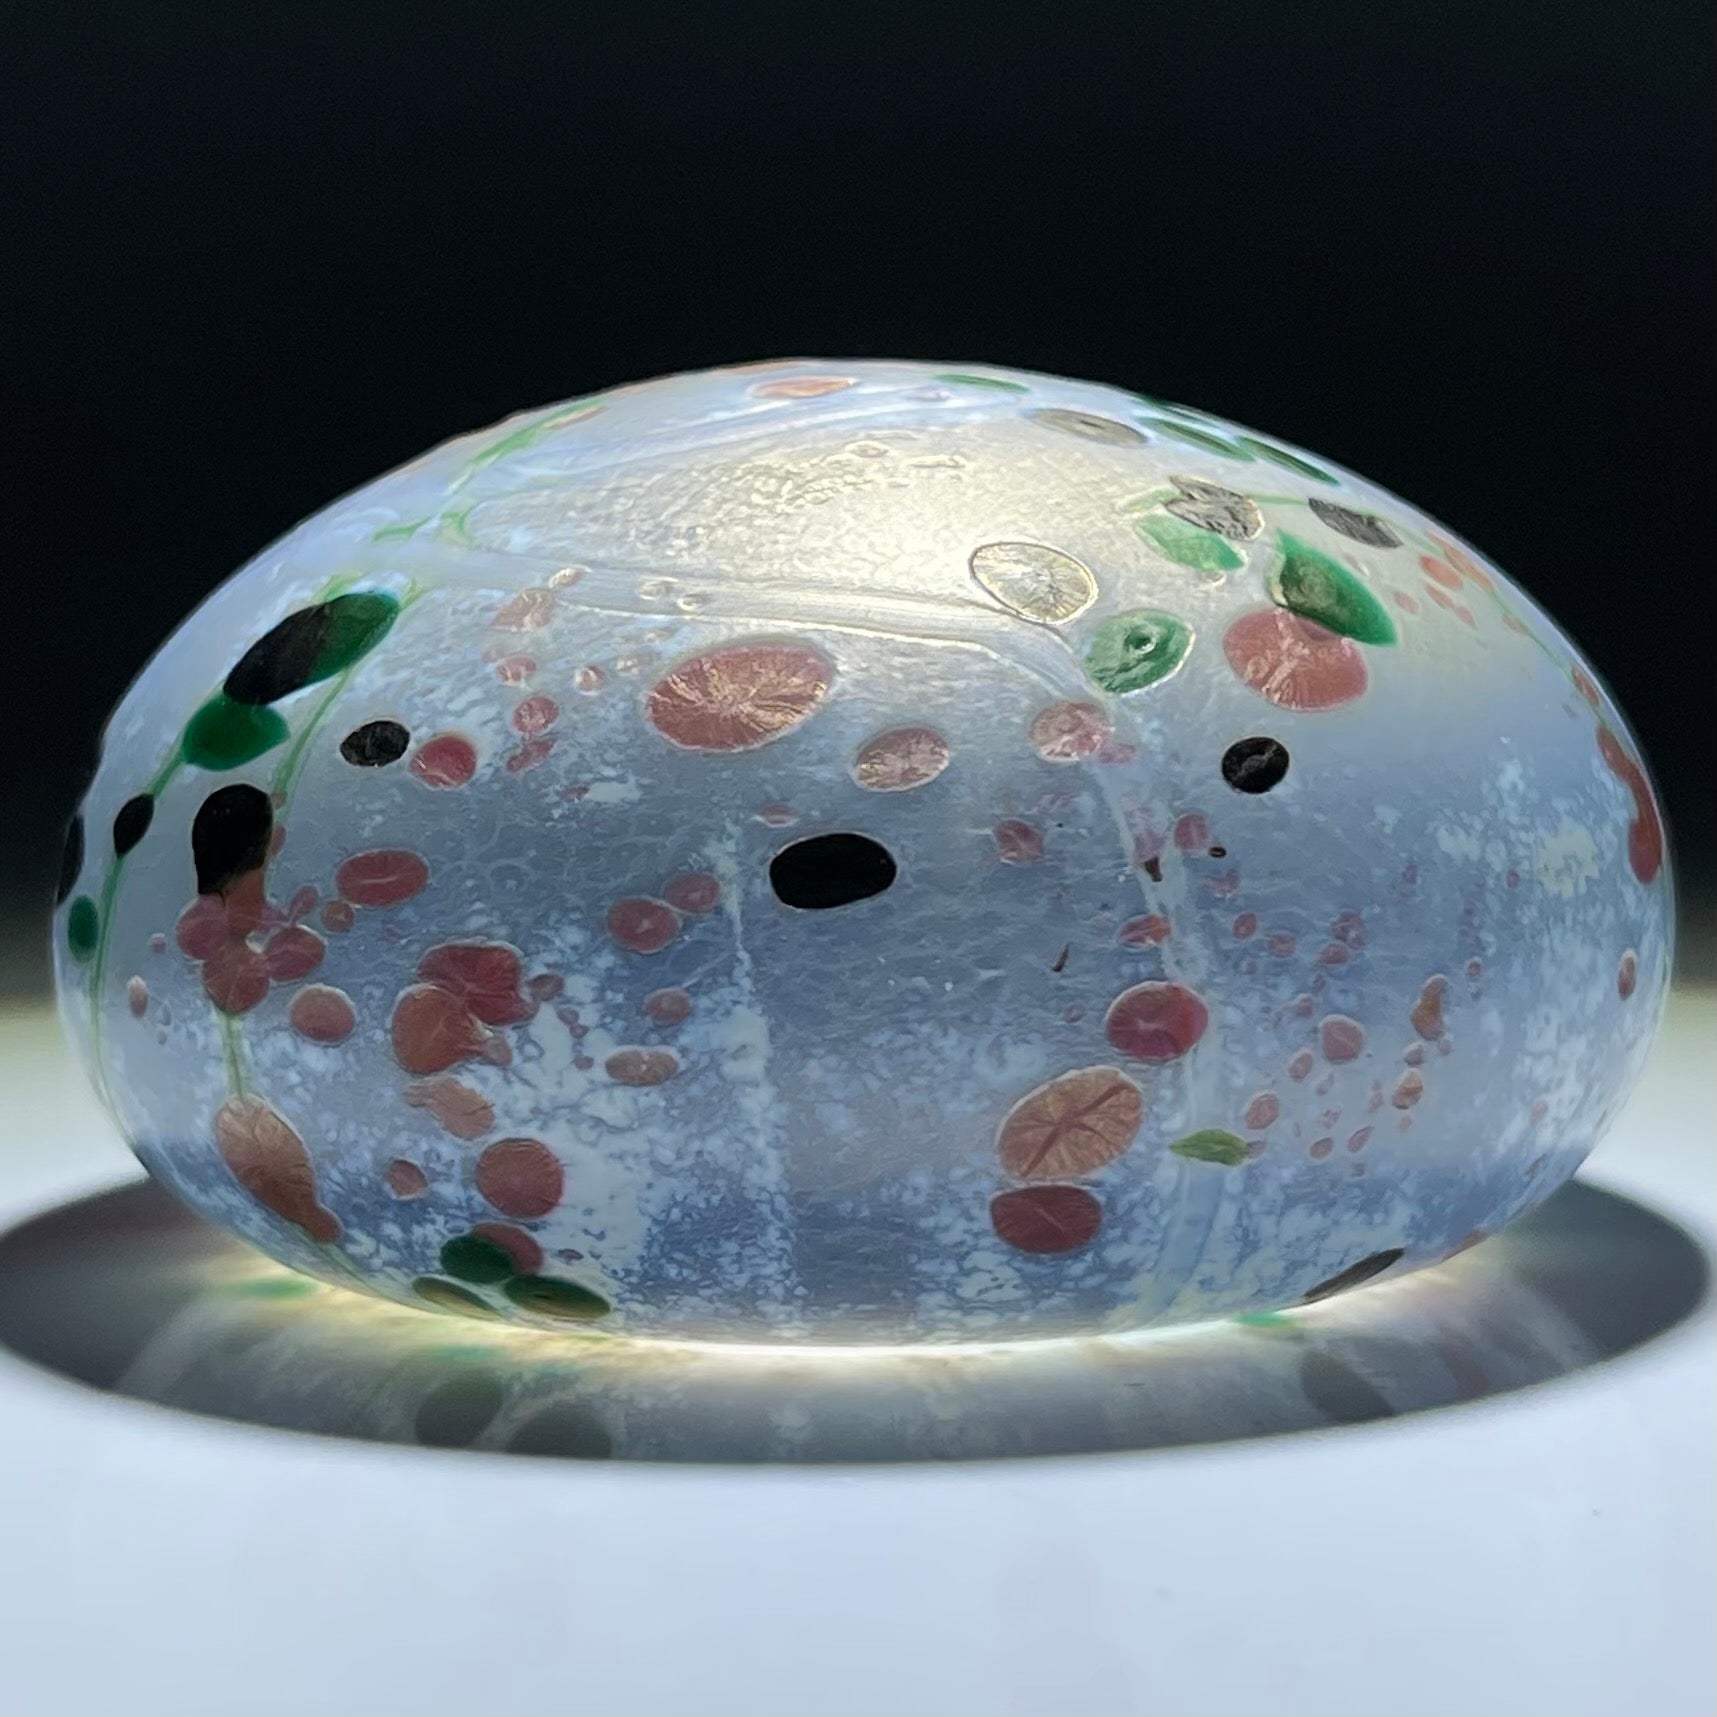 solar system sphere paperweight